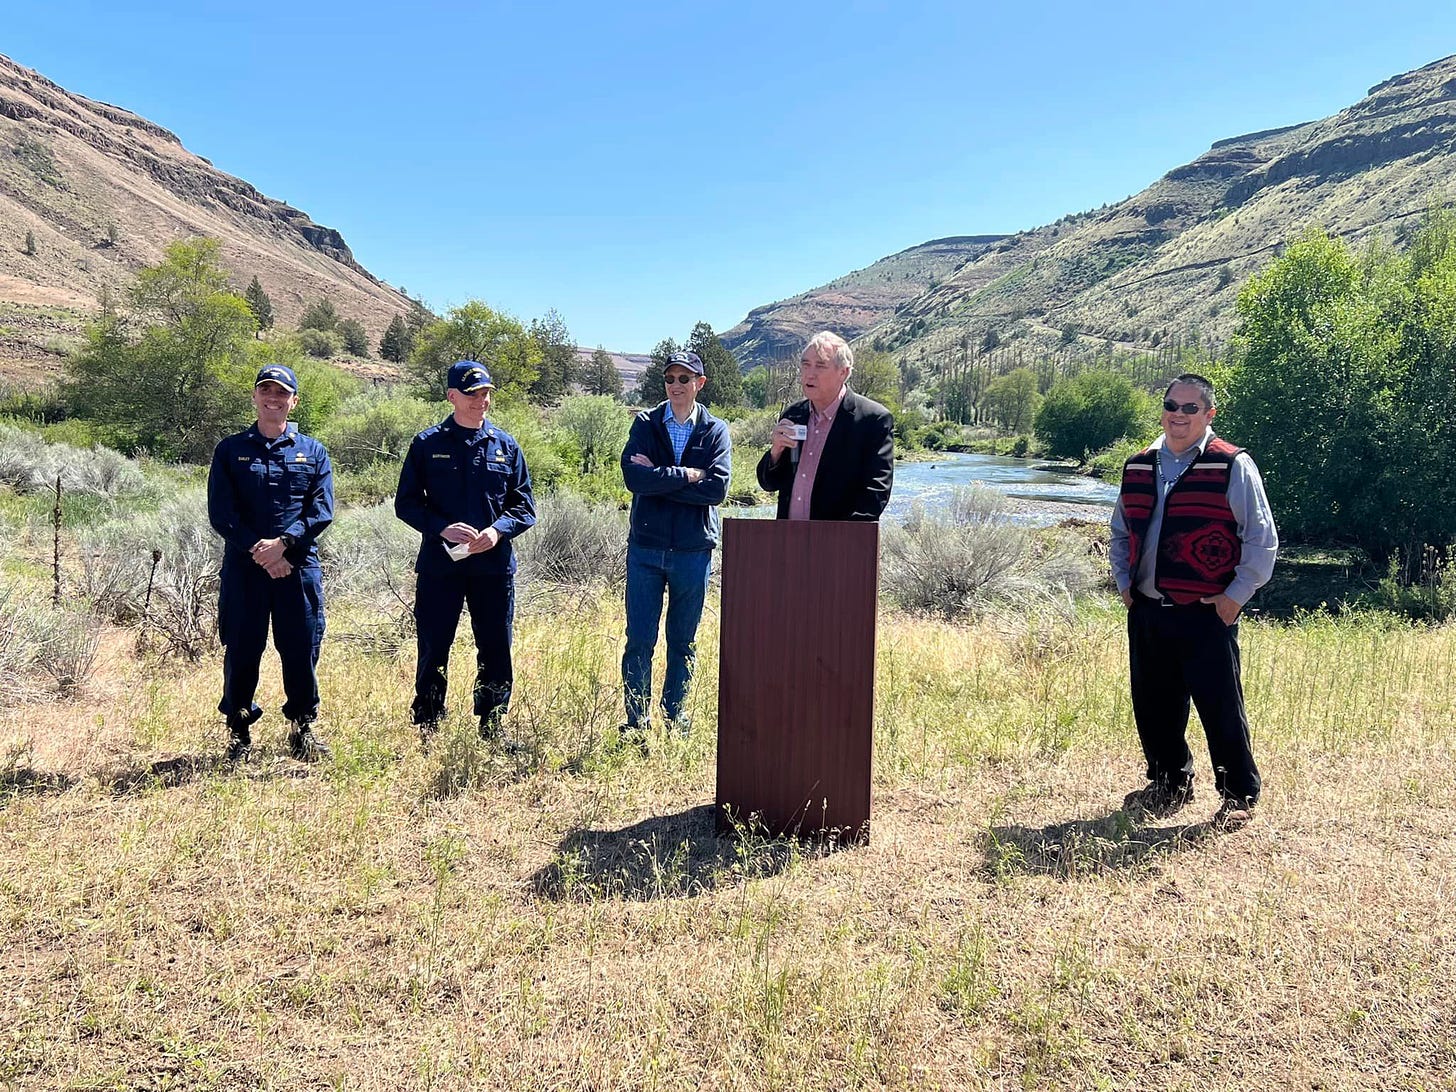 Senators Merkley and Wyden joined leaders from the Confederated Tribes of Warm Springs, EPA, IHS, and other federal partners to celebrate a combined $28 million federal investment to build a new water treatment facility that will better serve the Warm Springs community.
